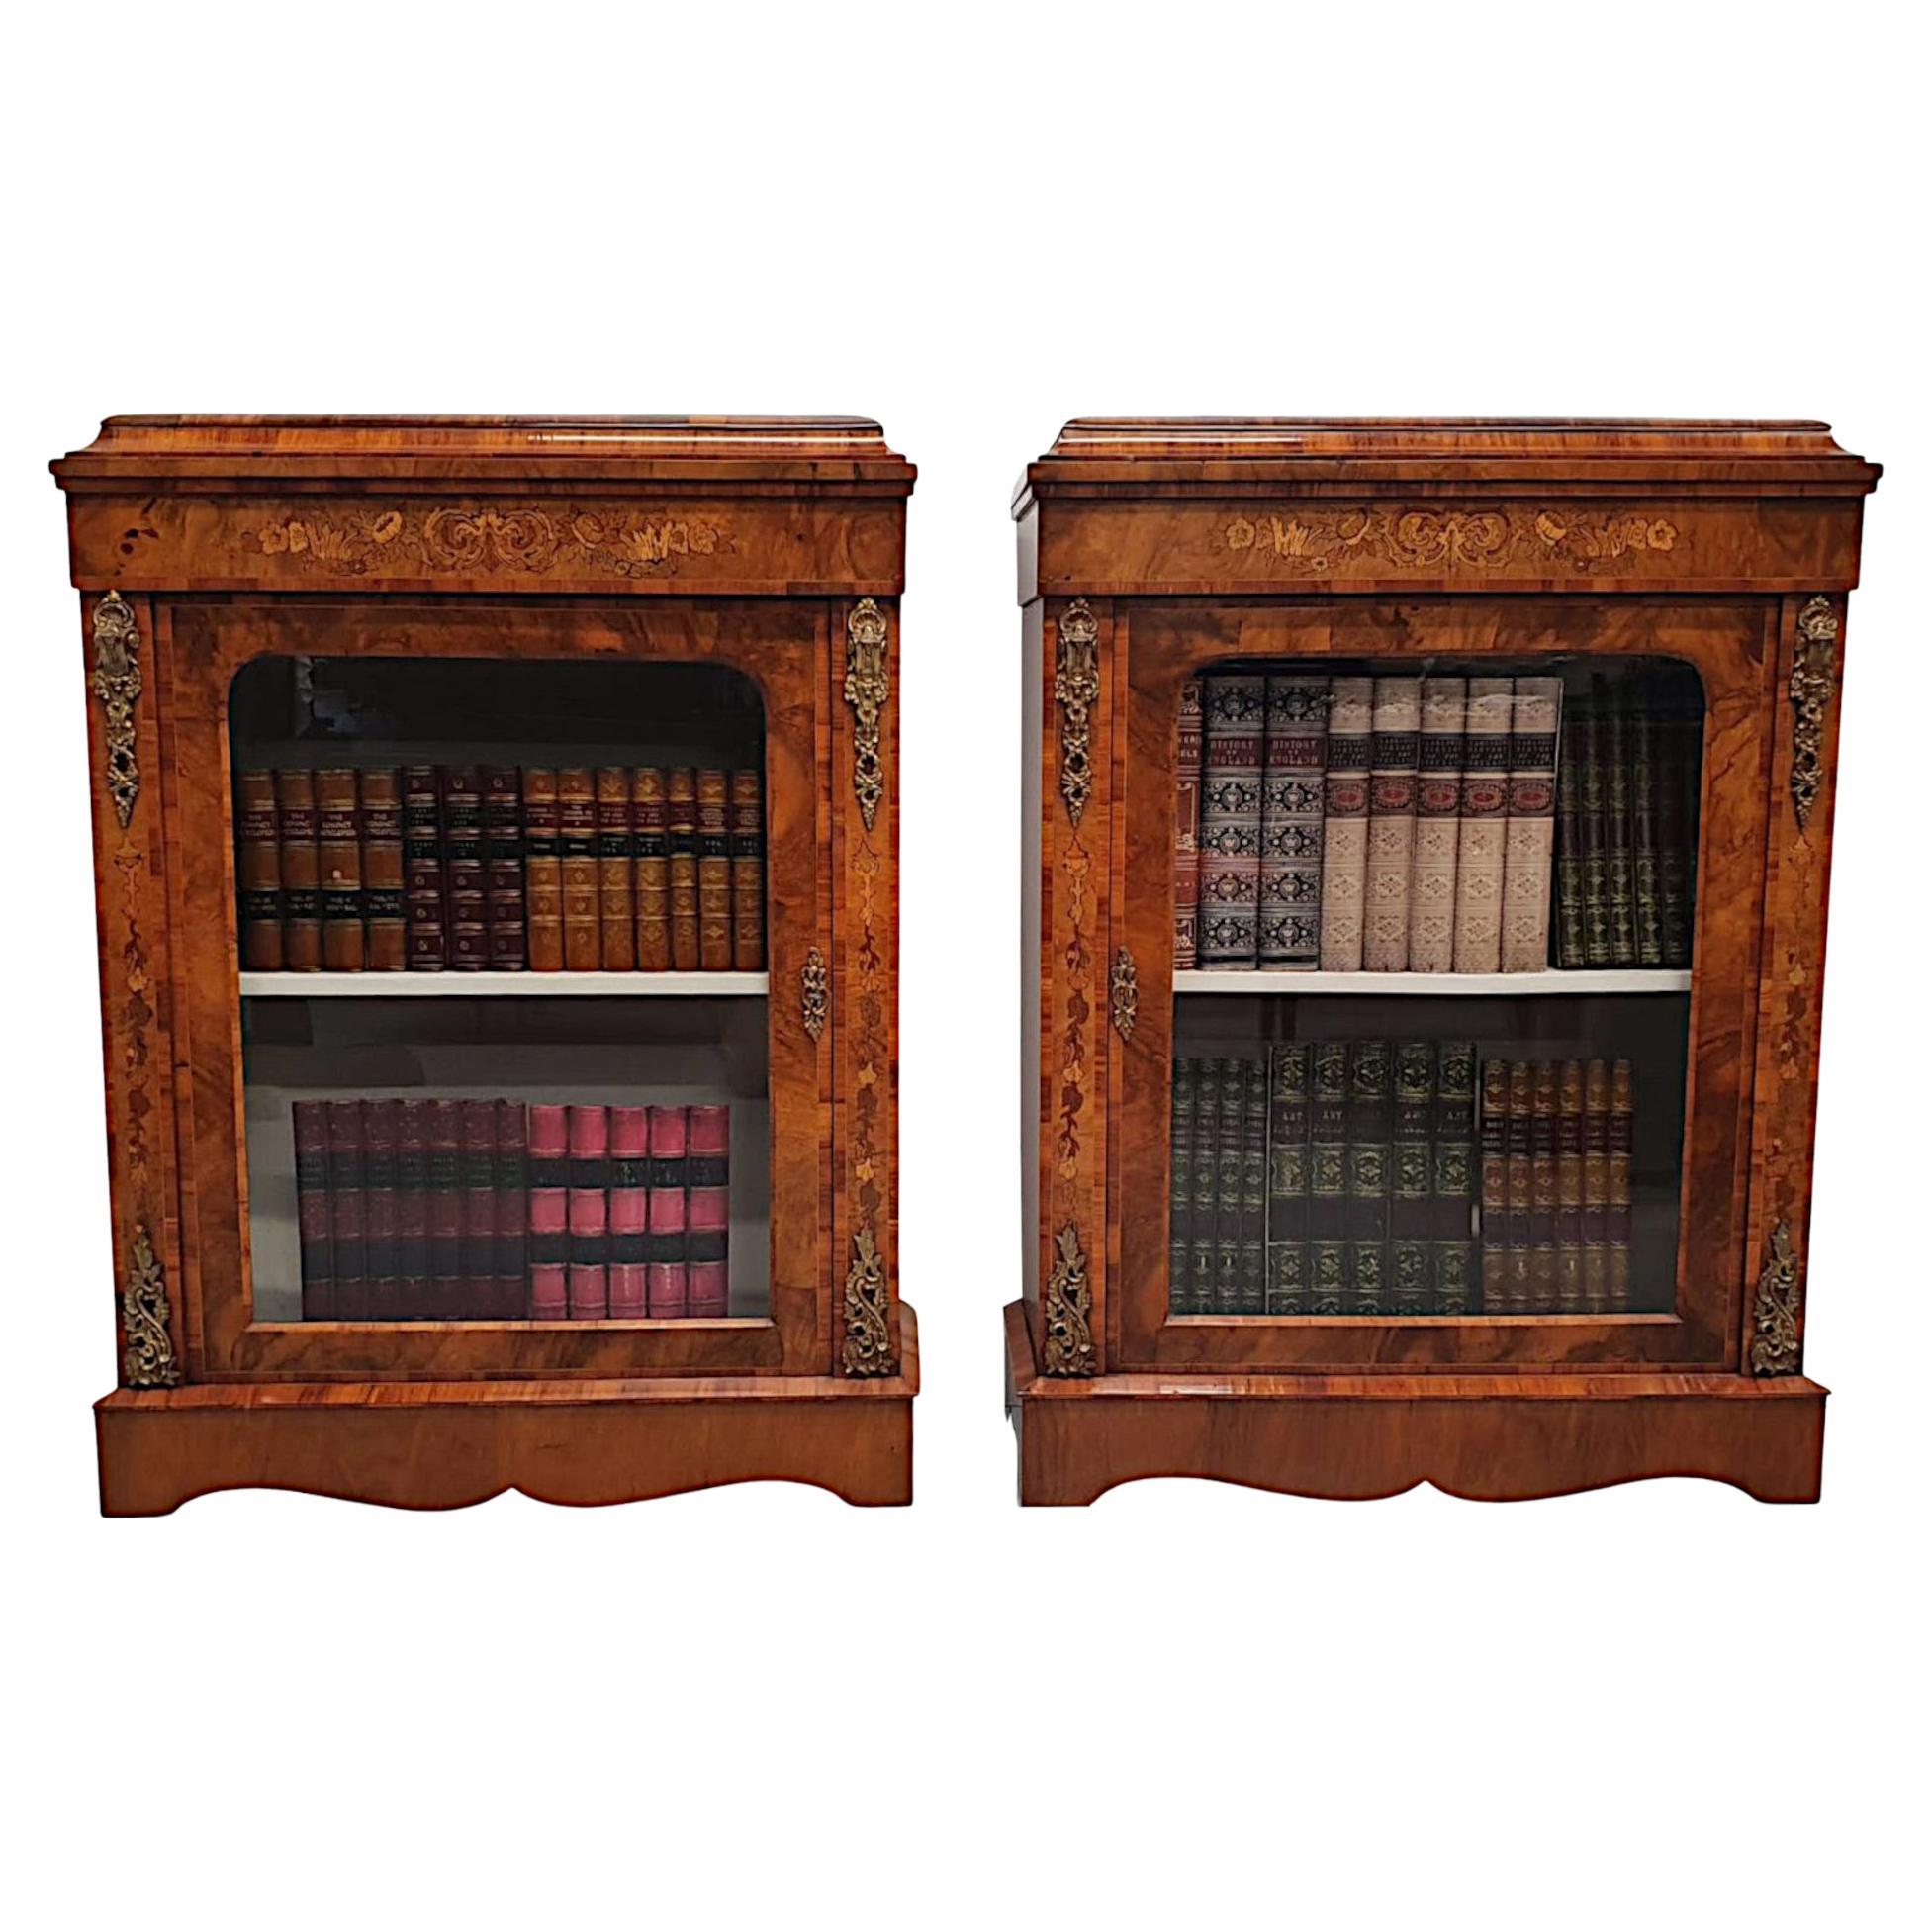 Exceptional Pair of Rare 19th Century Pier Cabinets or Bookcases For Sale